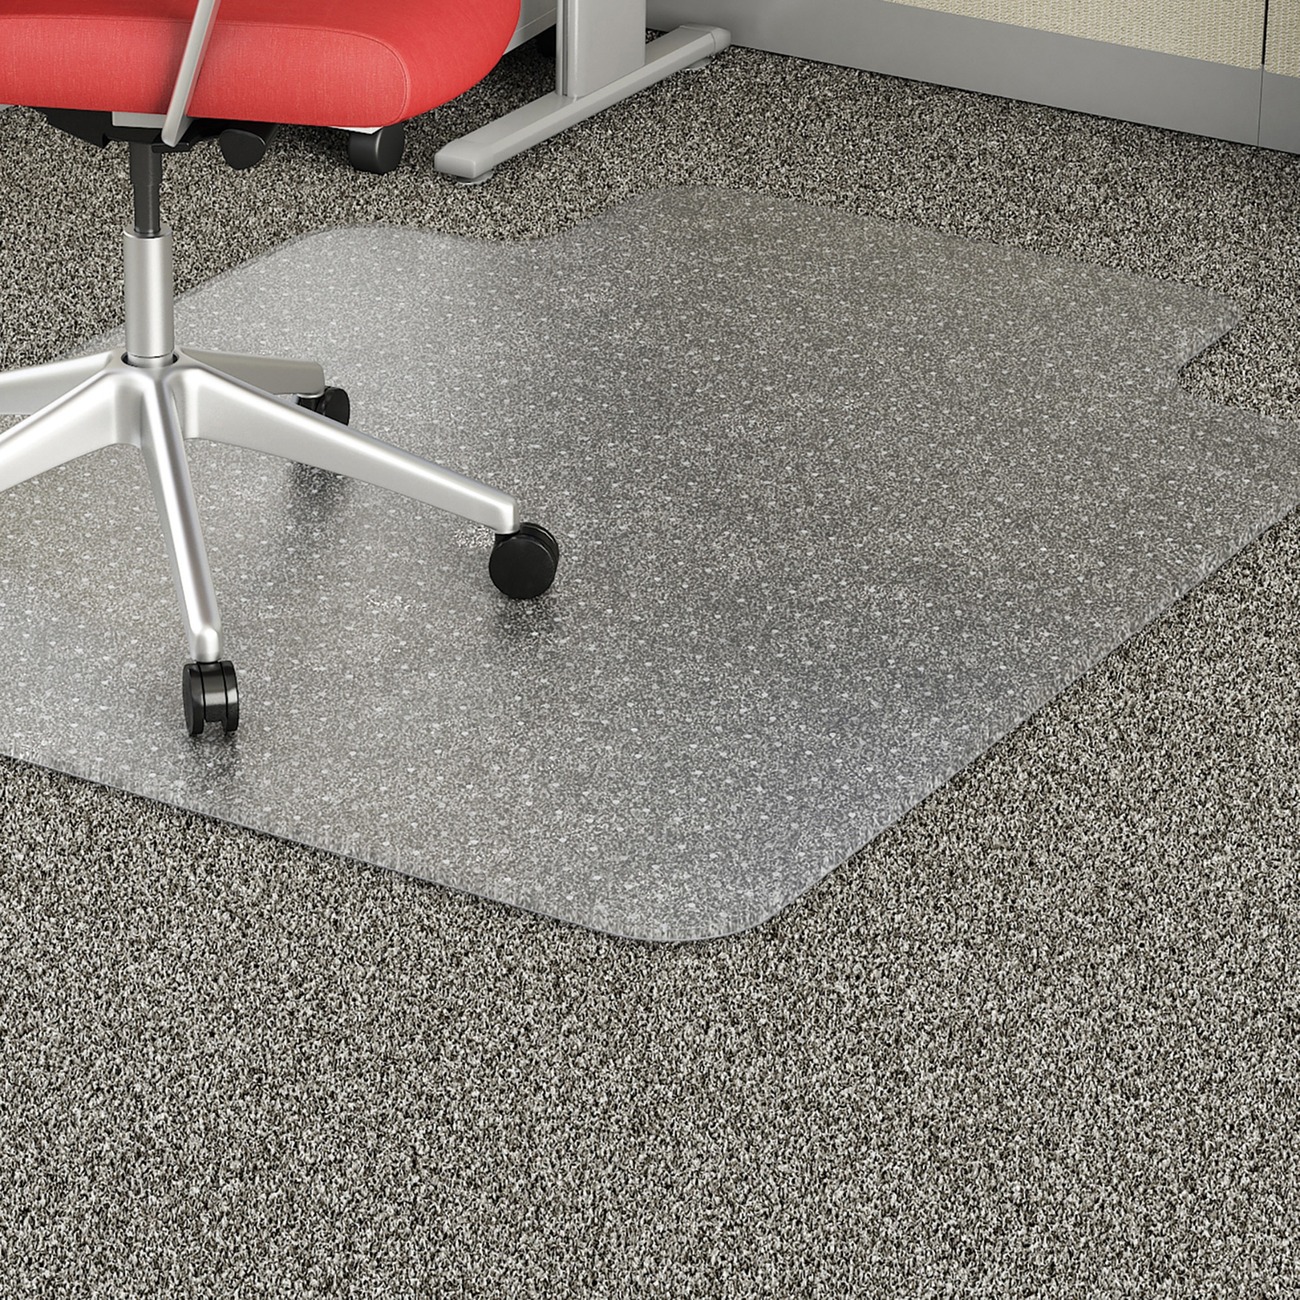 Heavy Duty Low Pile Carpet Chair Mat with Beveled Edge & Lip-36 W